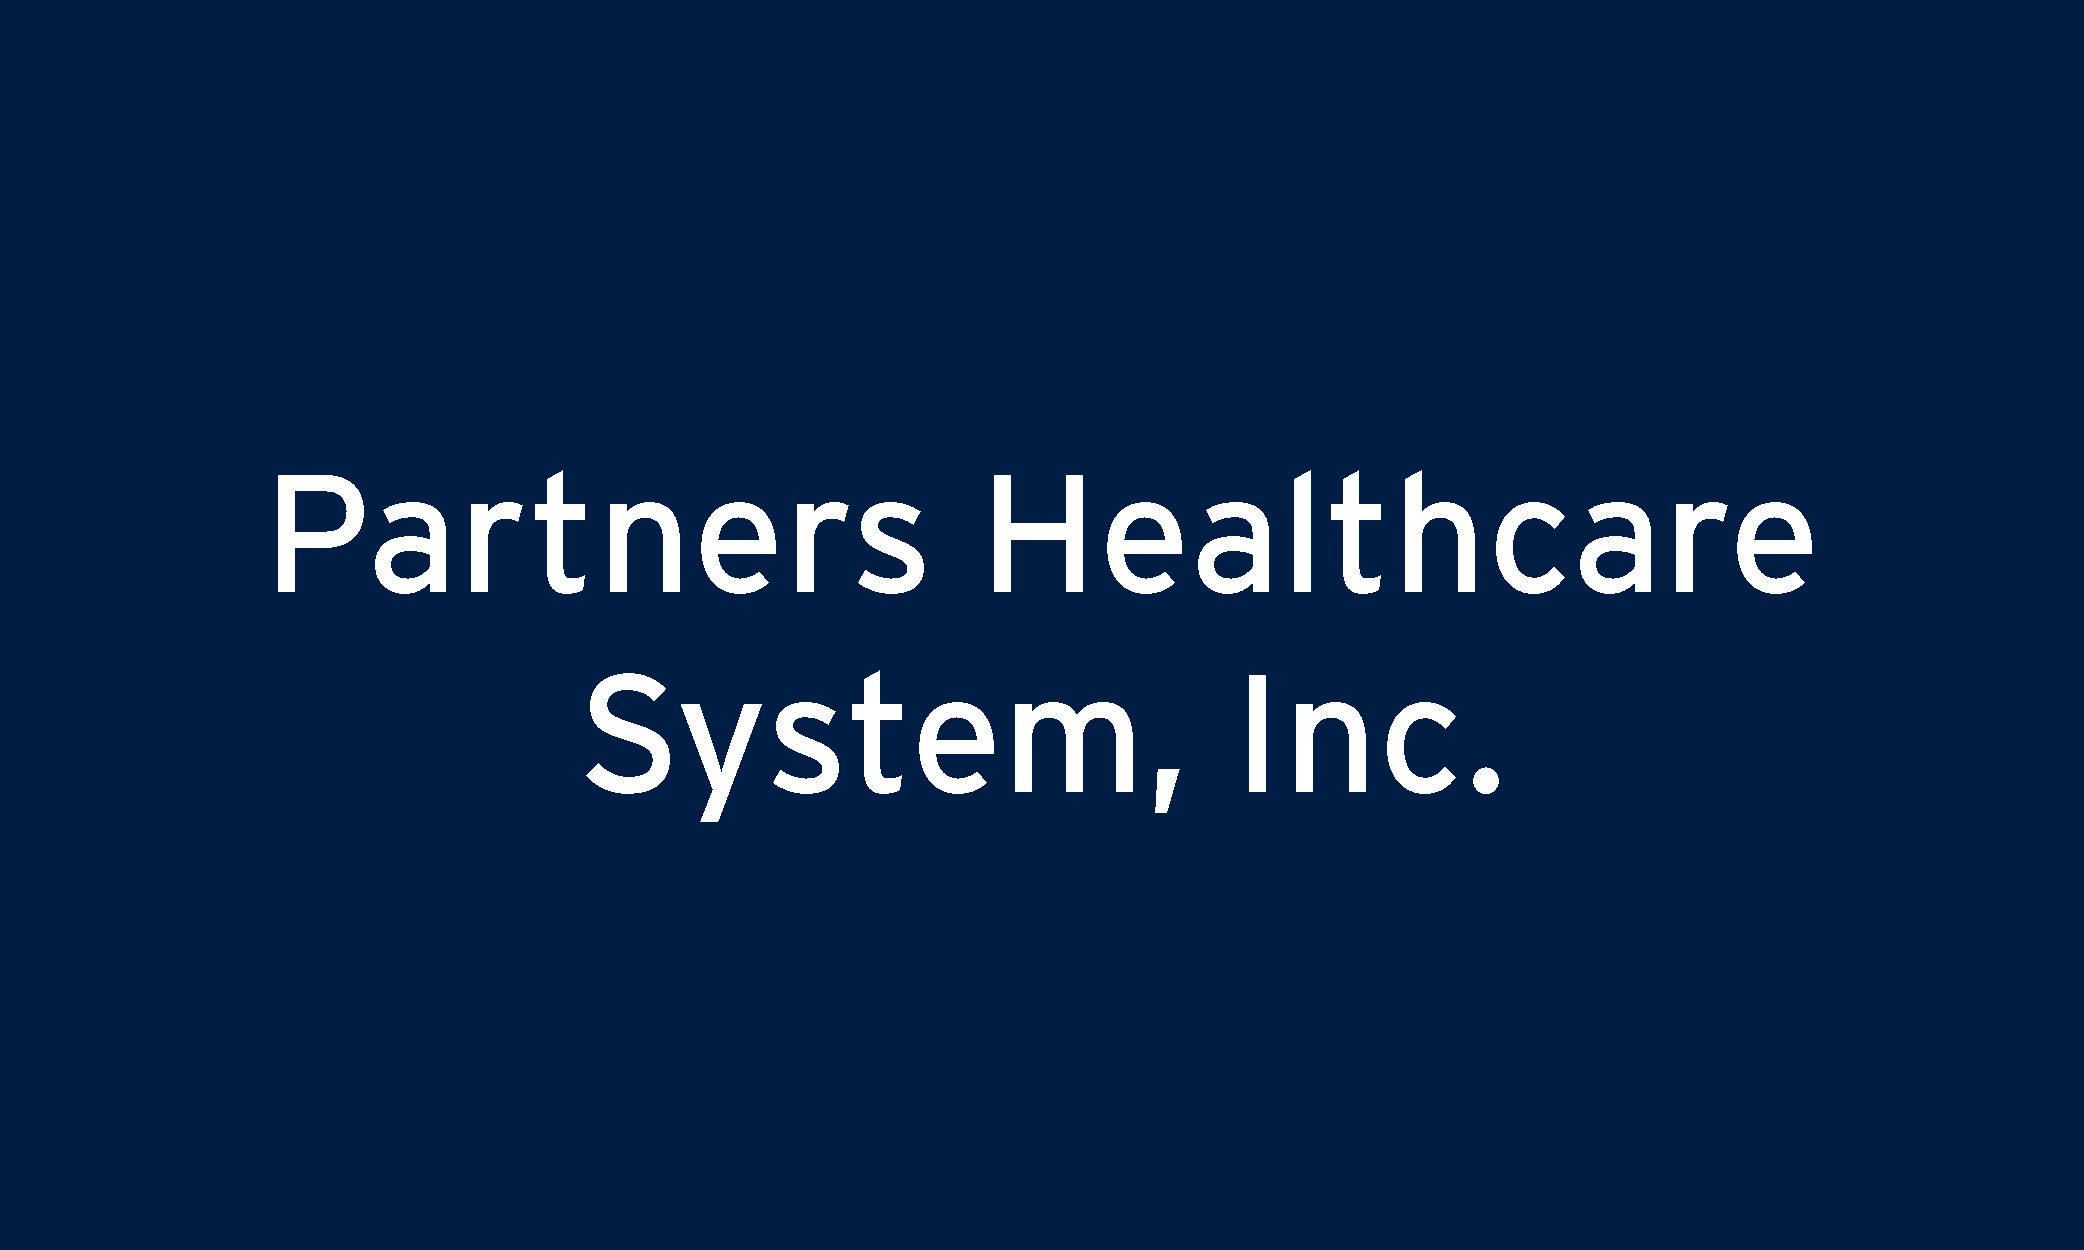 Partners Healthcare System, Inc.